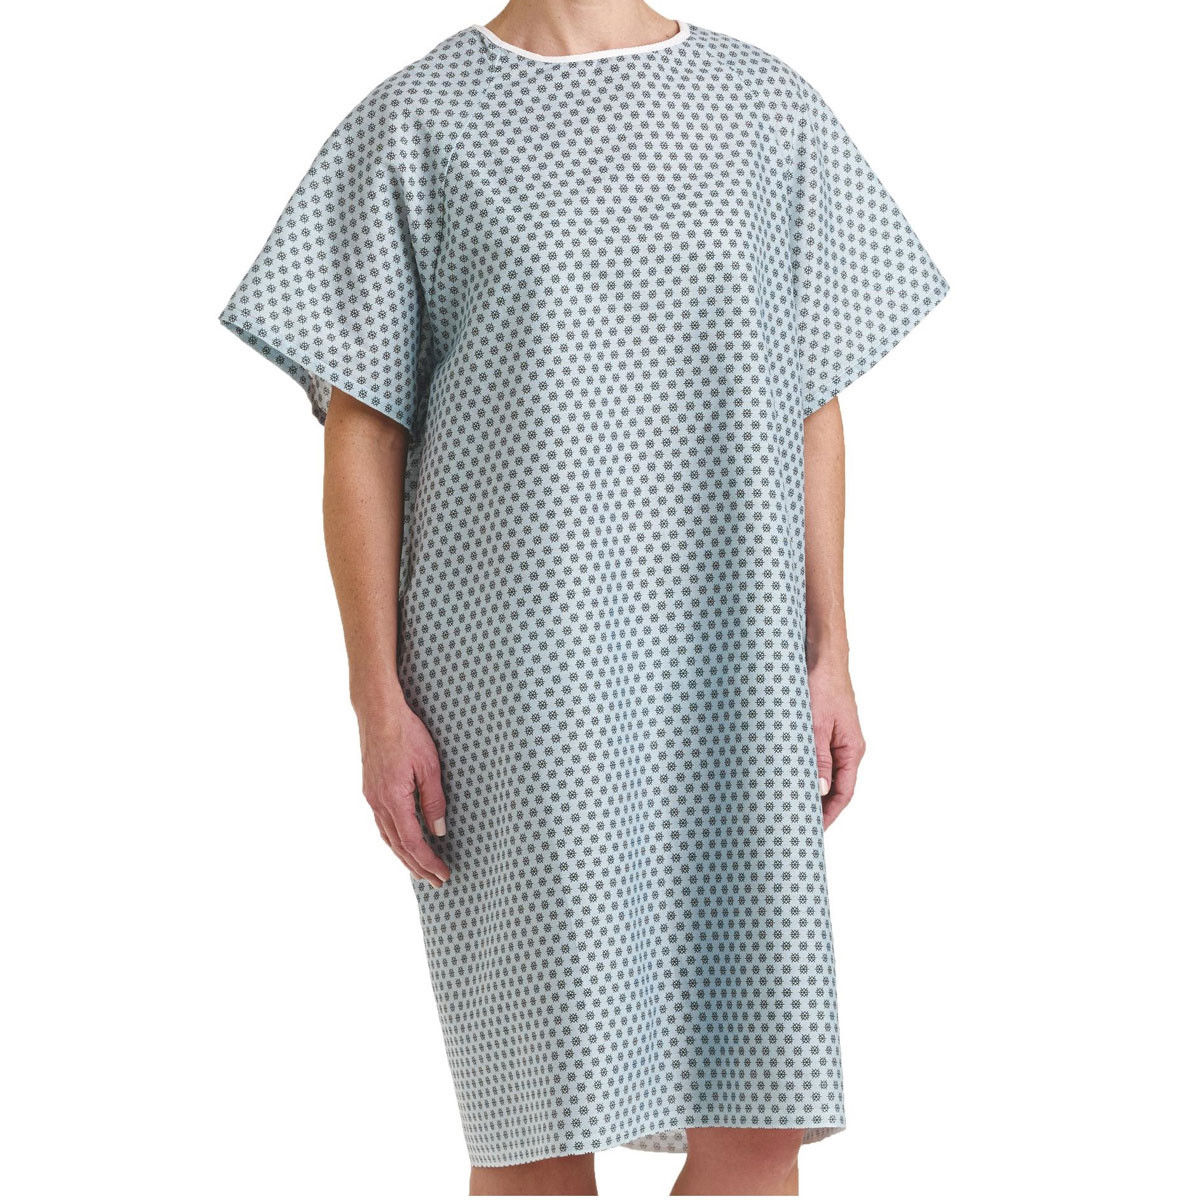 Why do hospital gowns tie at the back?